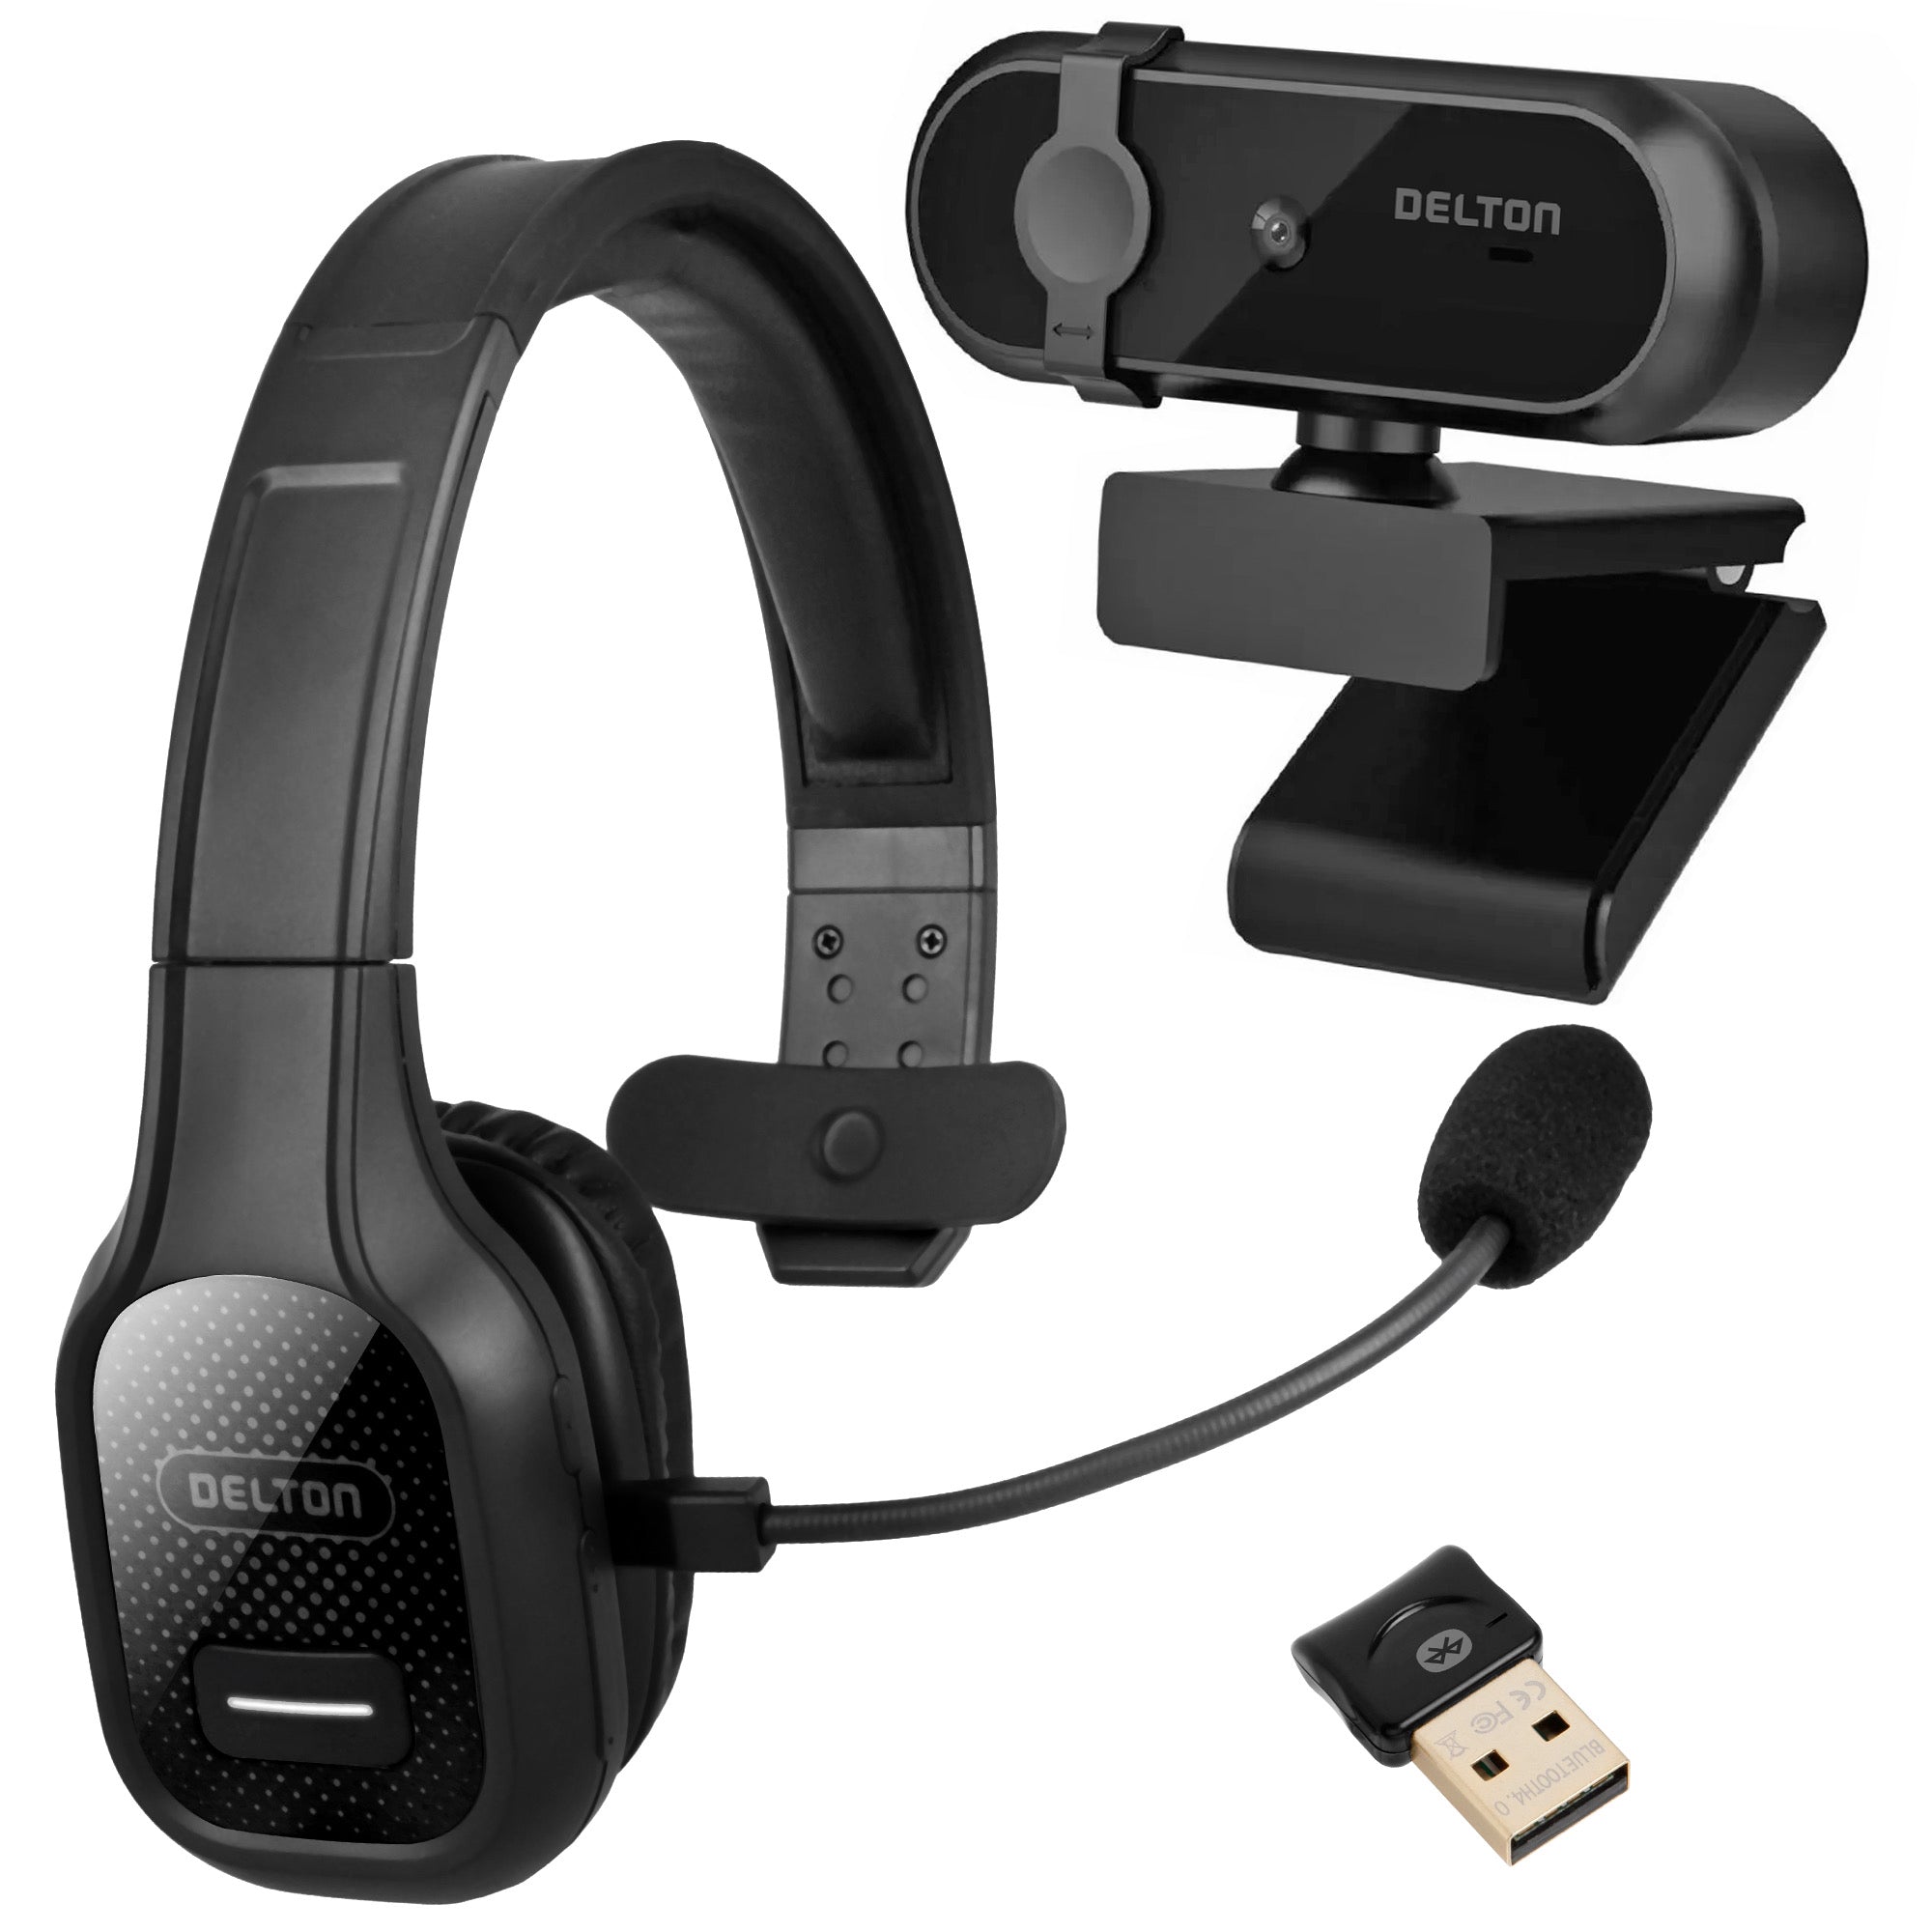 Delton 20x Headset with Webcam